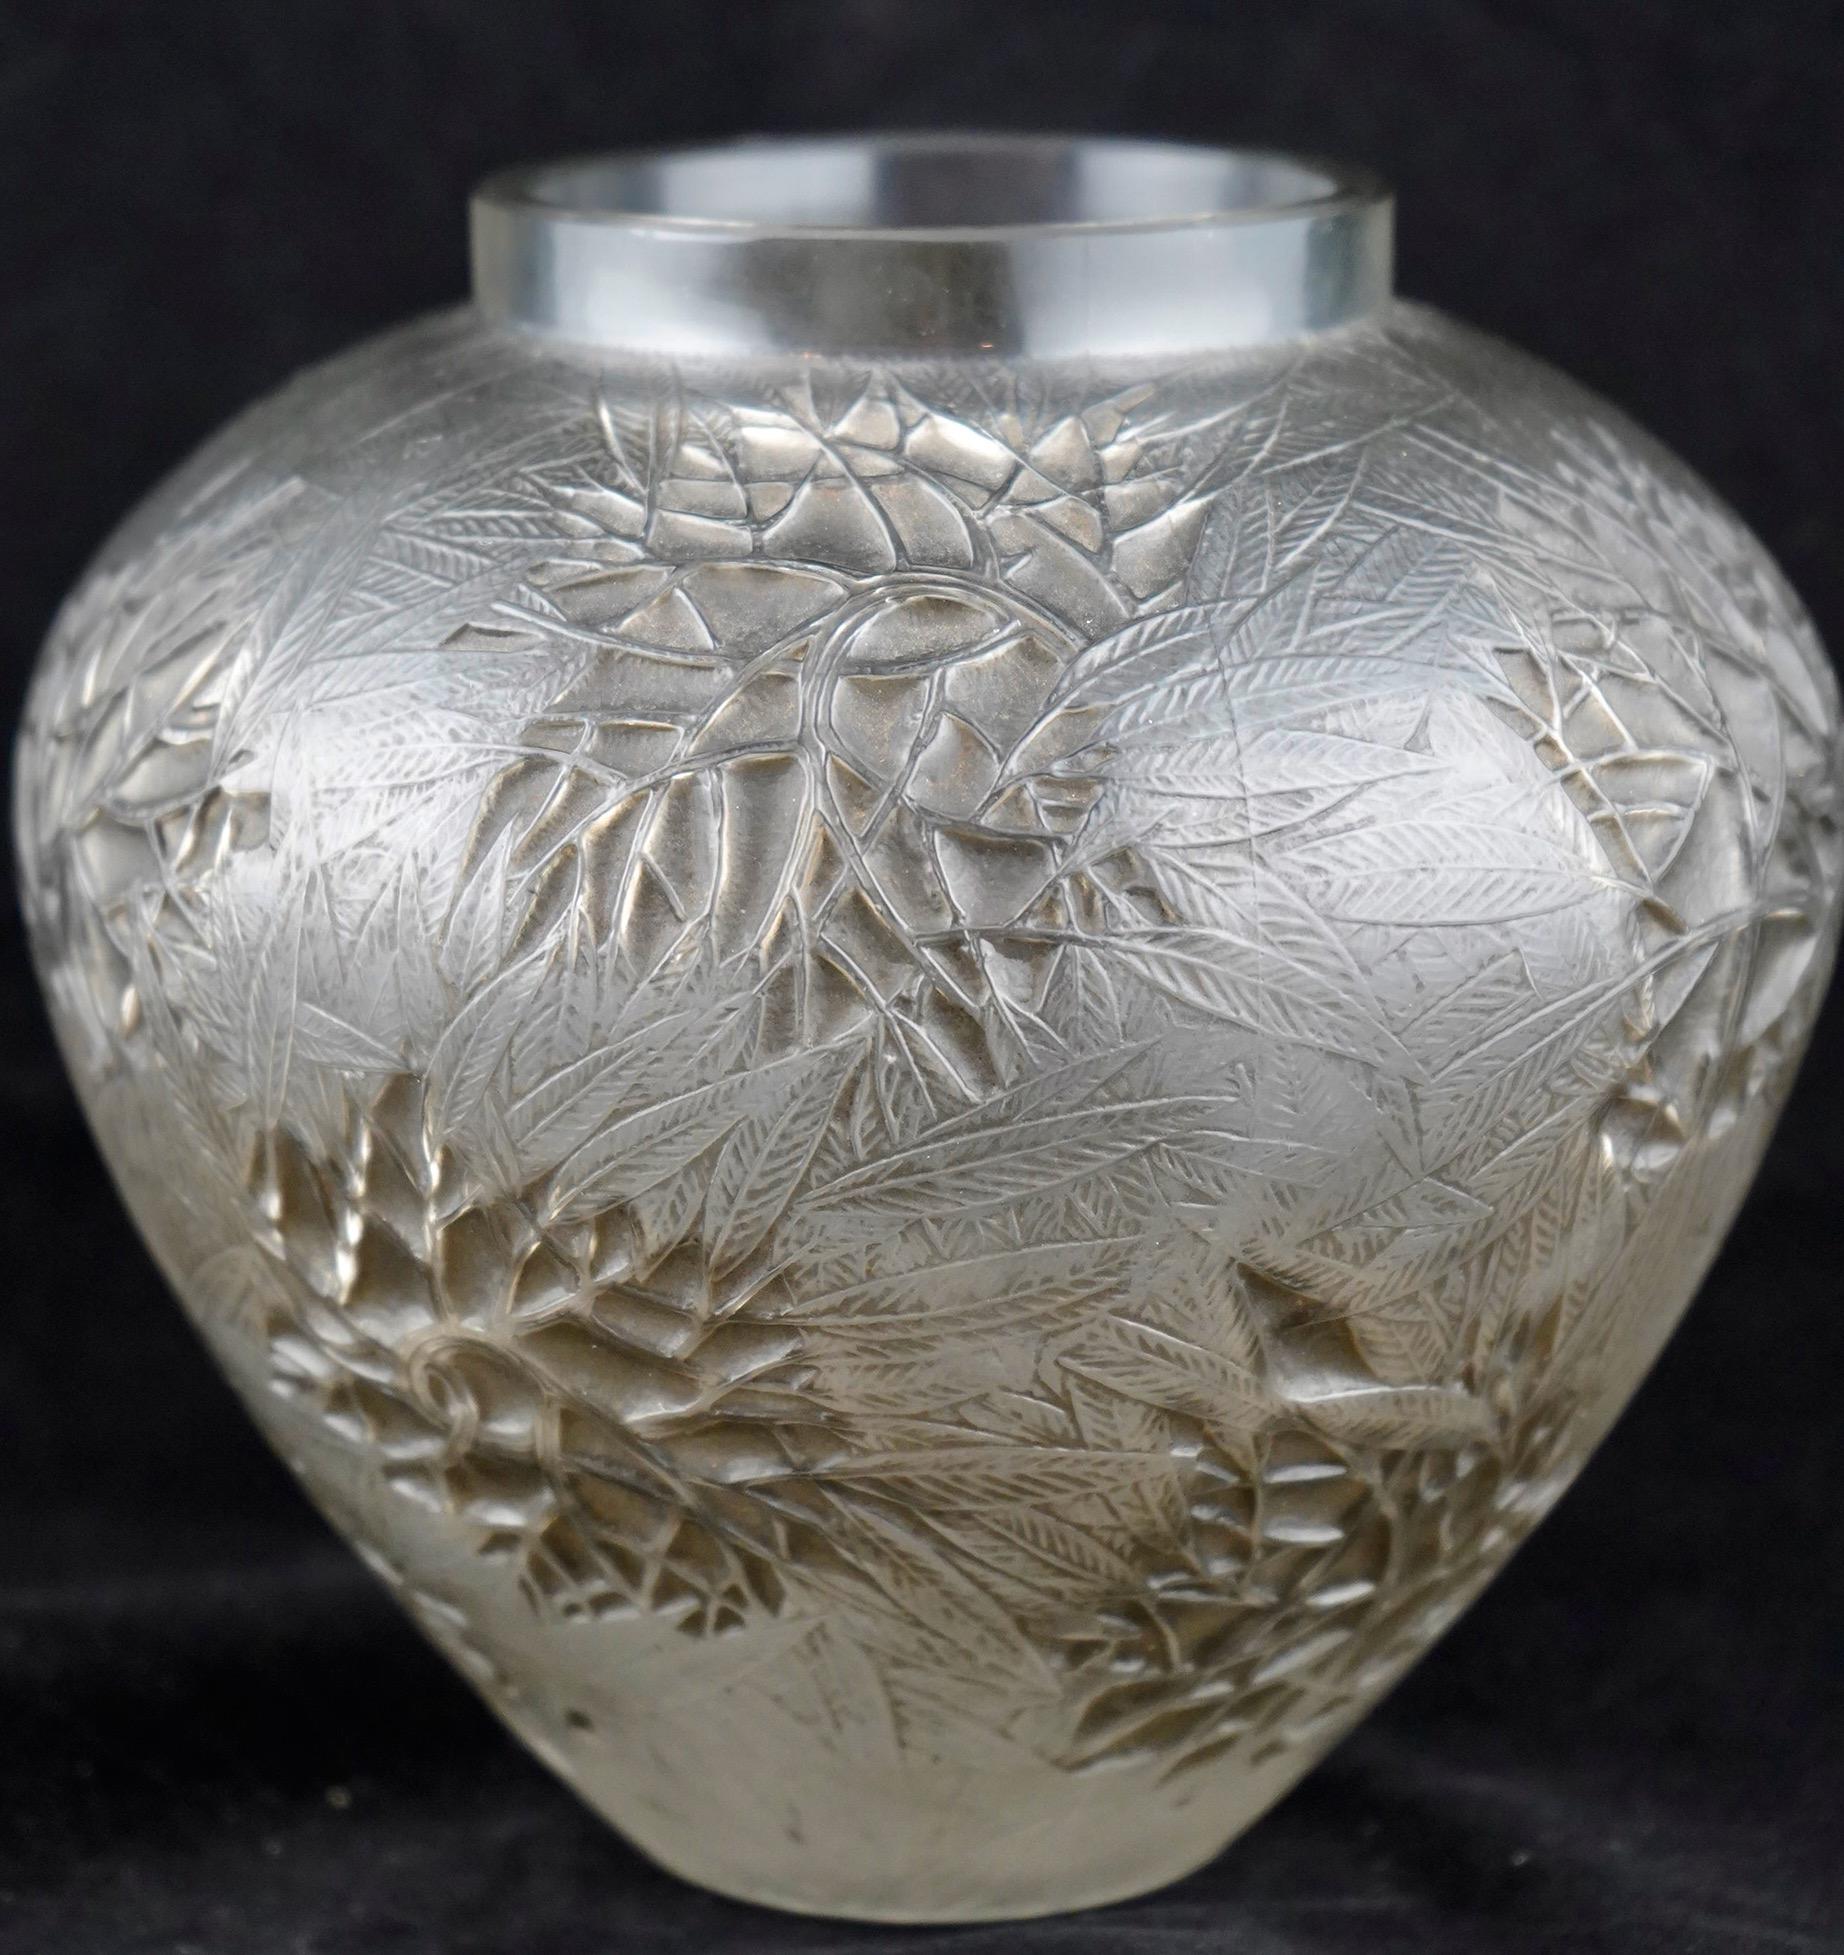 Rene Lalique 1923 design Esterel vase in grey patina. Factory polished mouth and molded signature on the base.